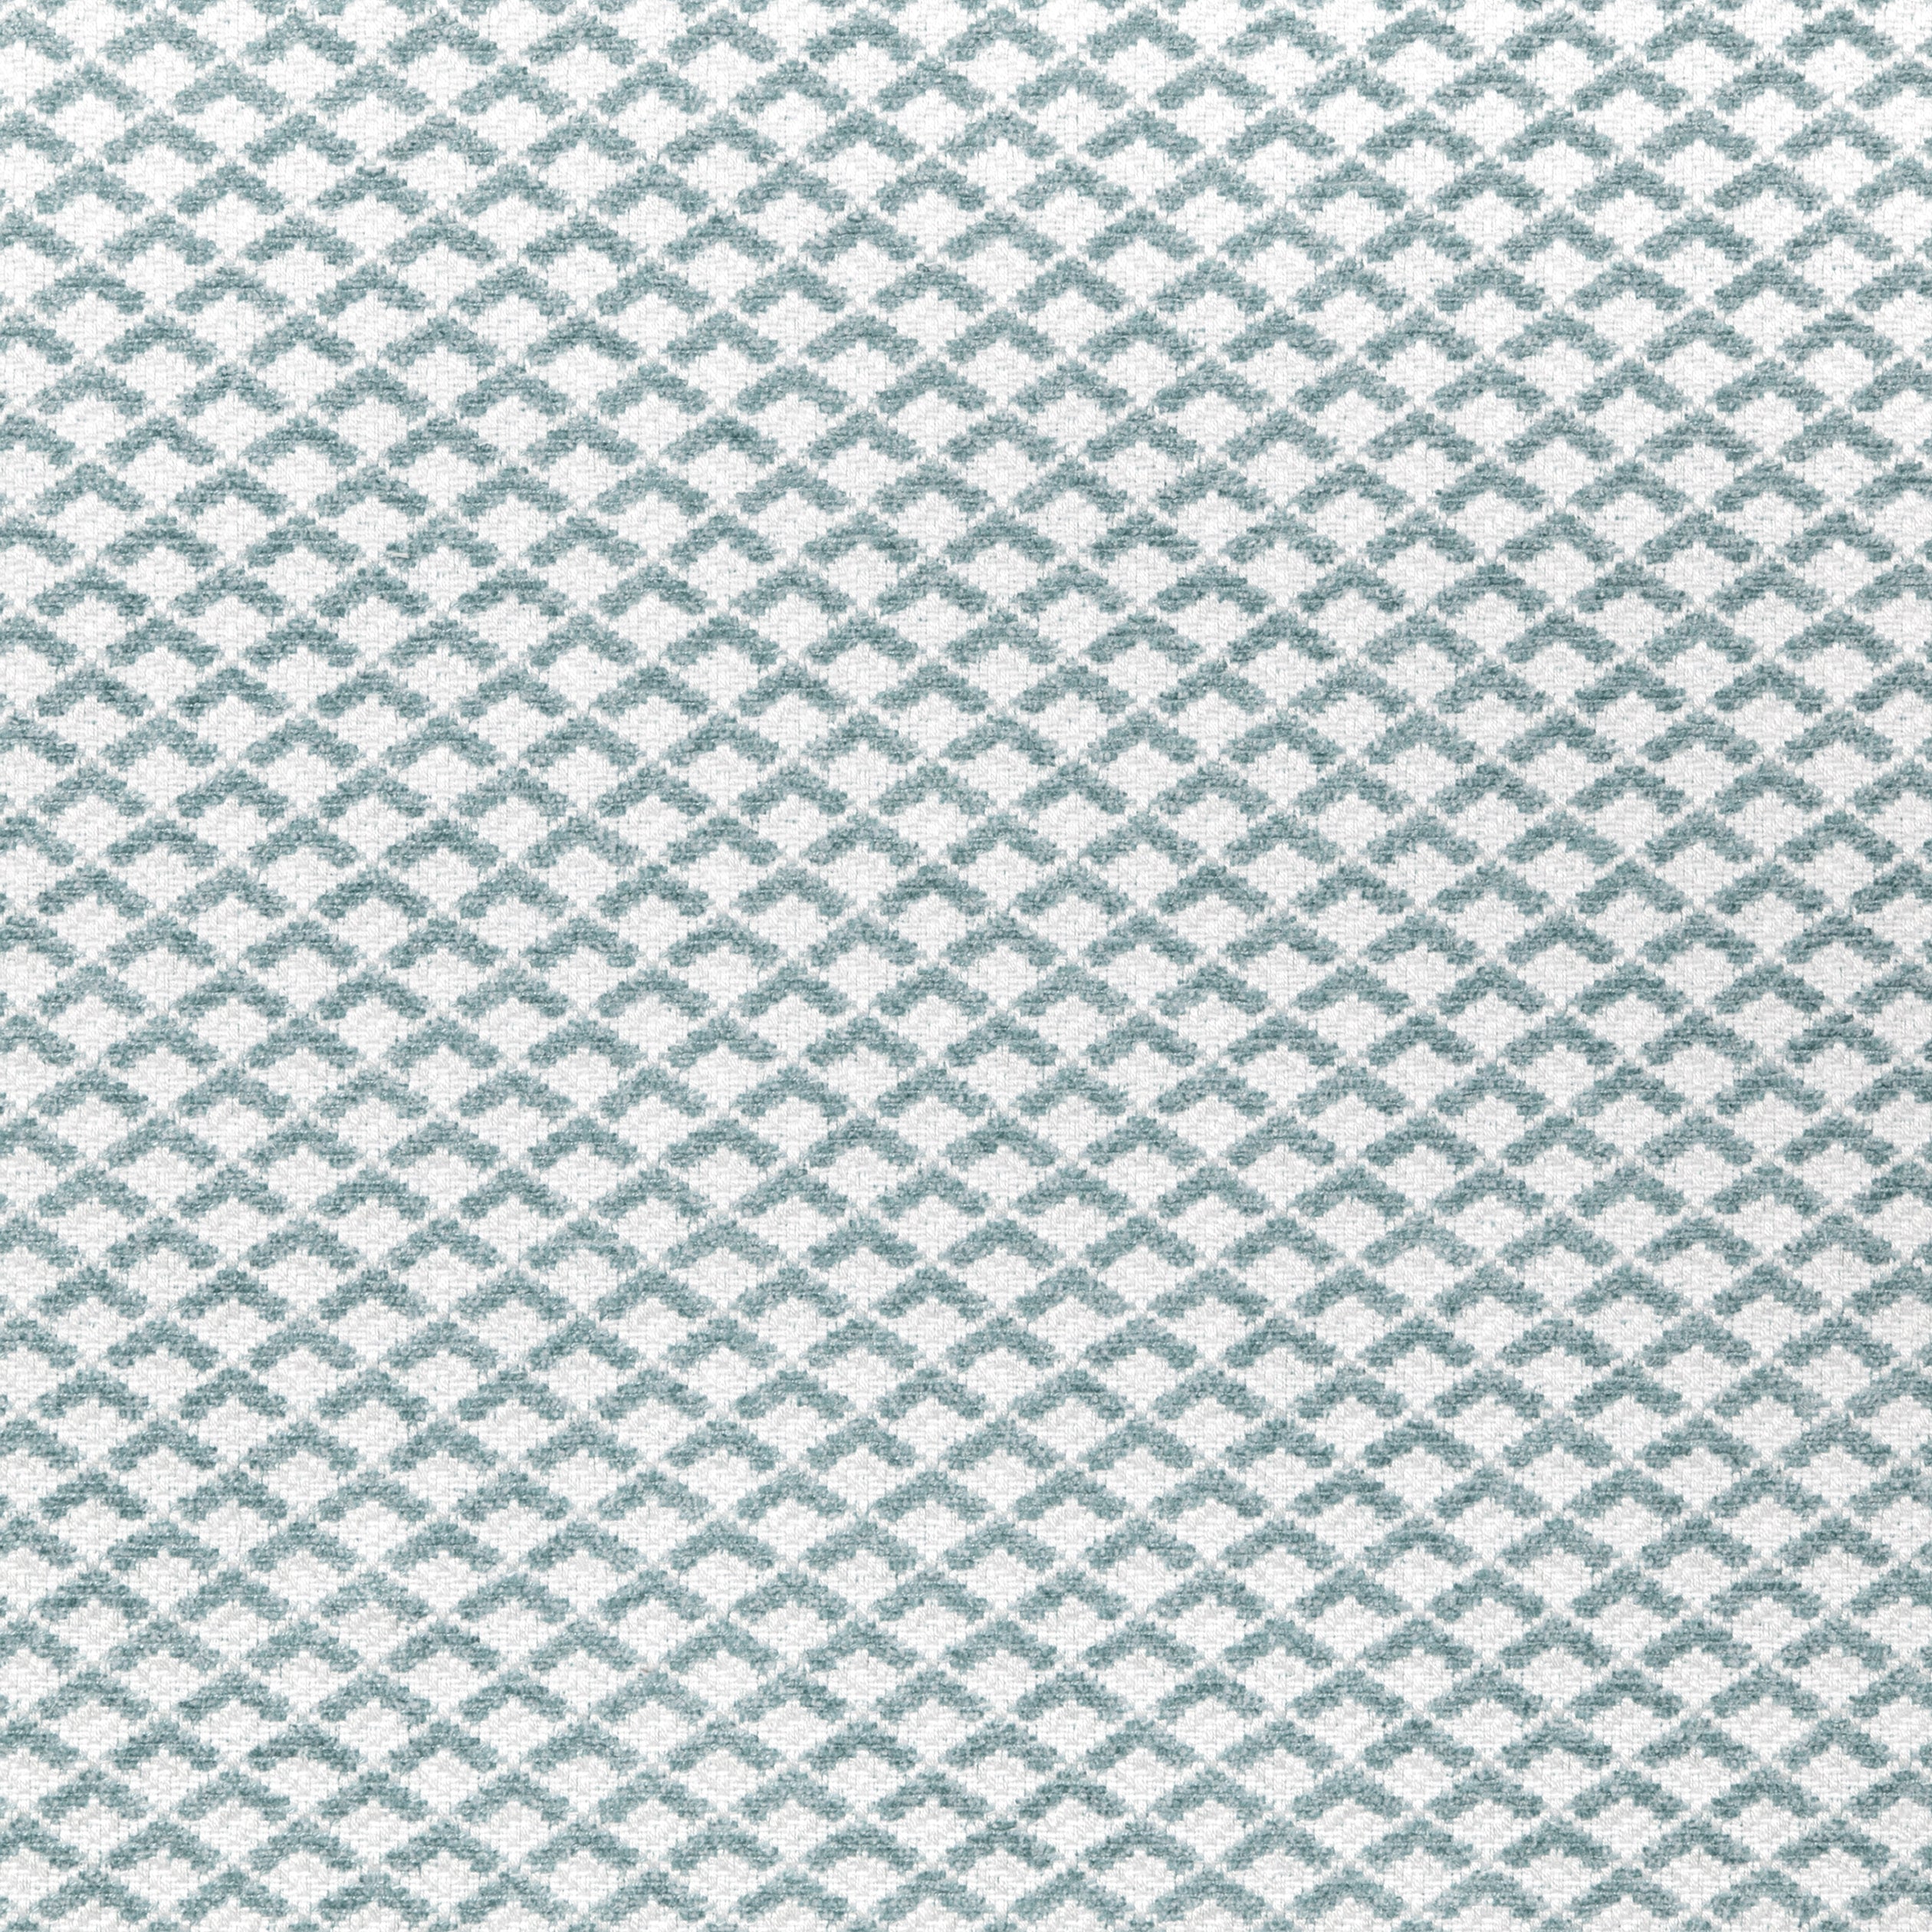 Scala fabric in celadon color - pattern number W80726 - by Thibaut in the Woven Resource 11: Rialto collection